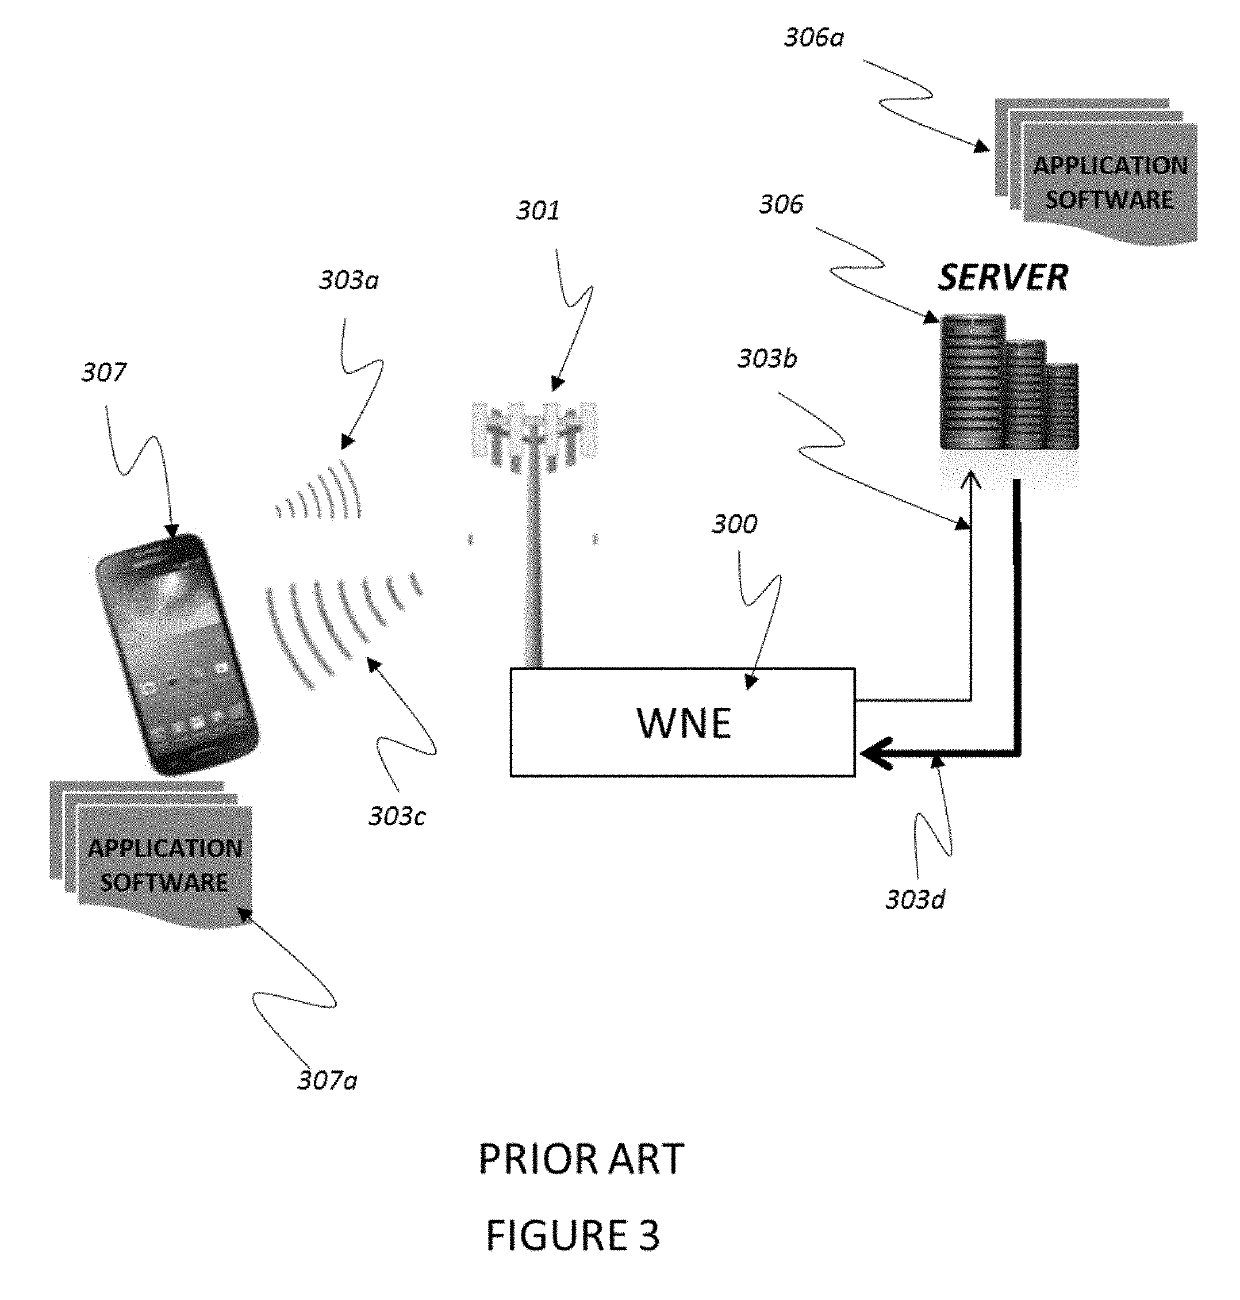 System for estimating wireless network load and proactively adjusting applications to minimize wireless network overload probability and maximize successful application operation